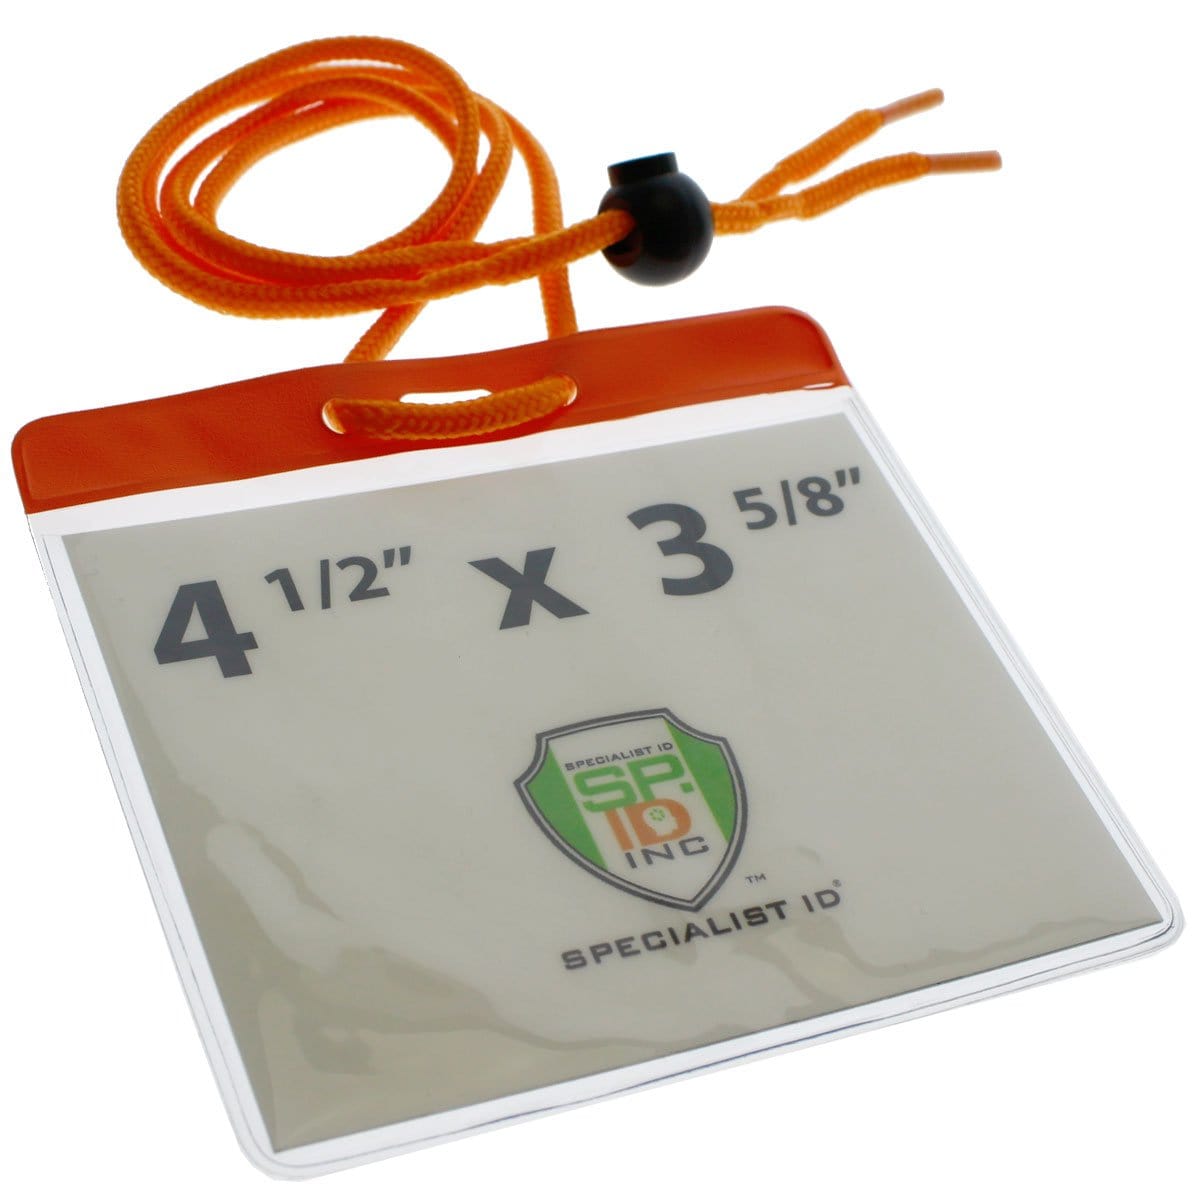 4 x 3 Color Bar Event Badge Holder with Lanyard from